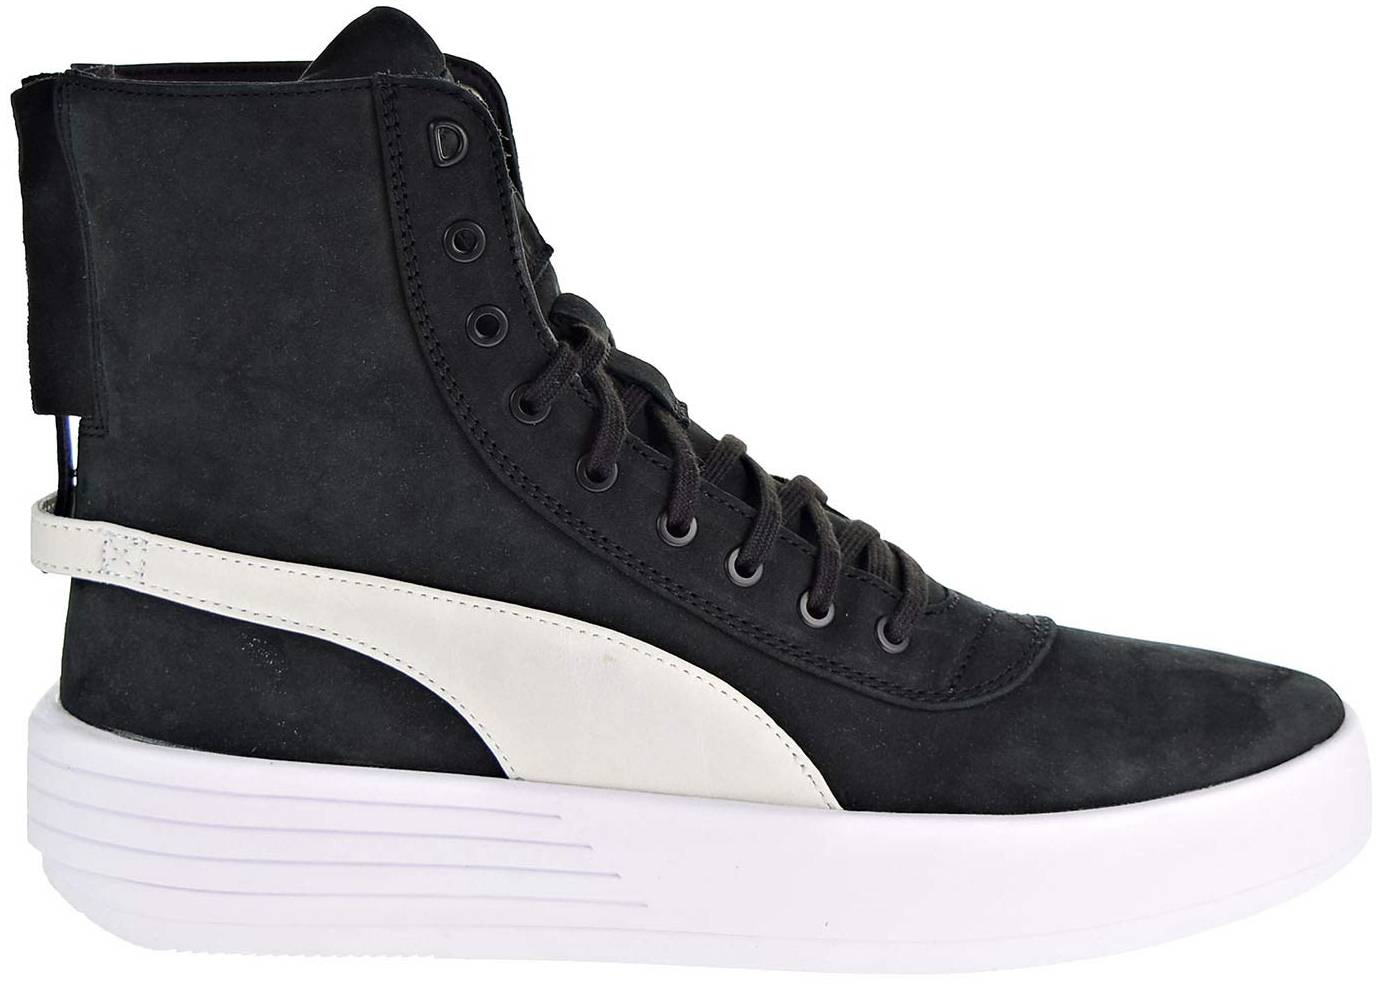 puma black shoes with white sole